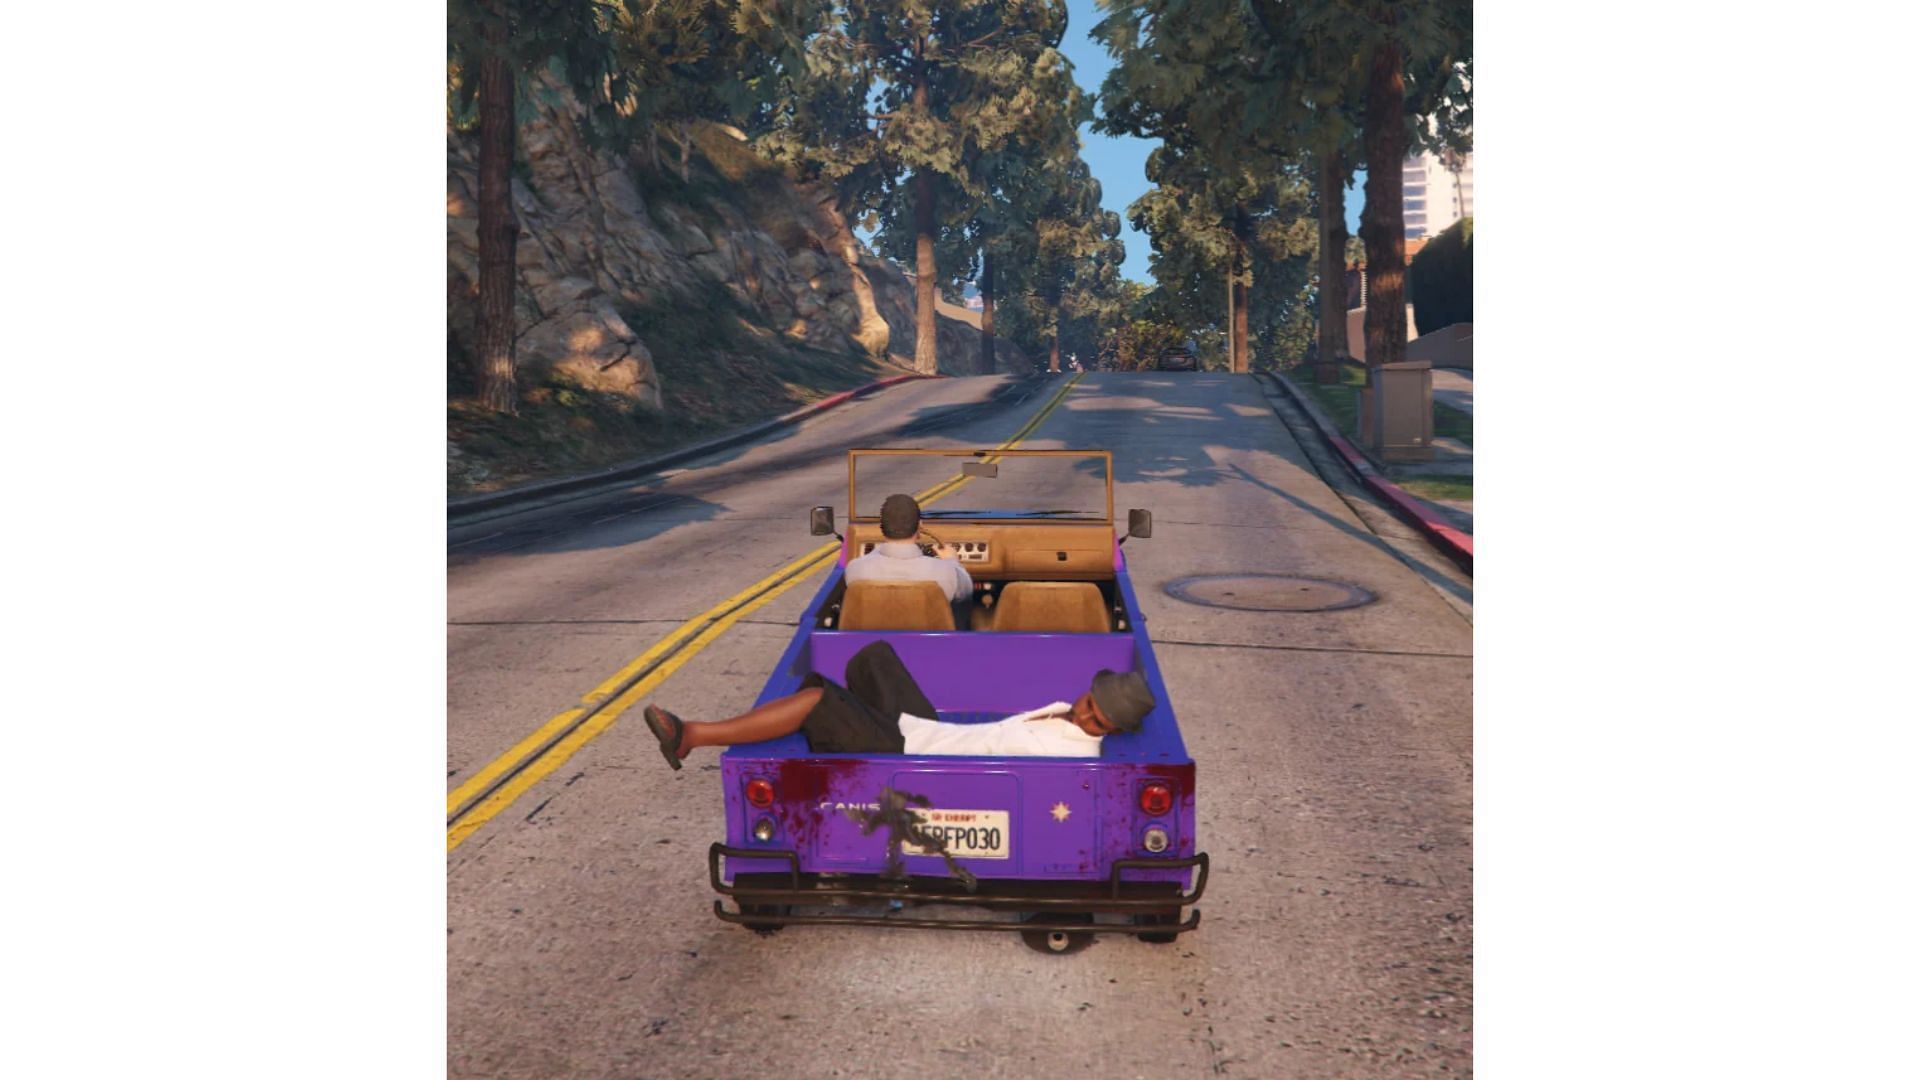 A demonstration on how to carry NPCs in car trunks in Grand Theft Auto 6 (Image via Reddit: u/Free_Fig_9885)